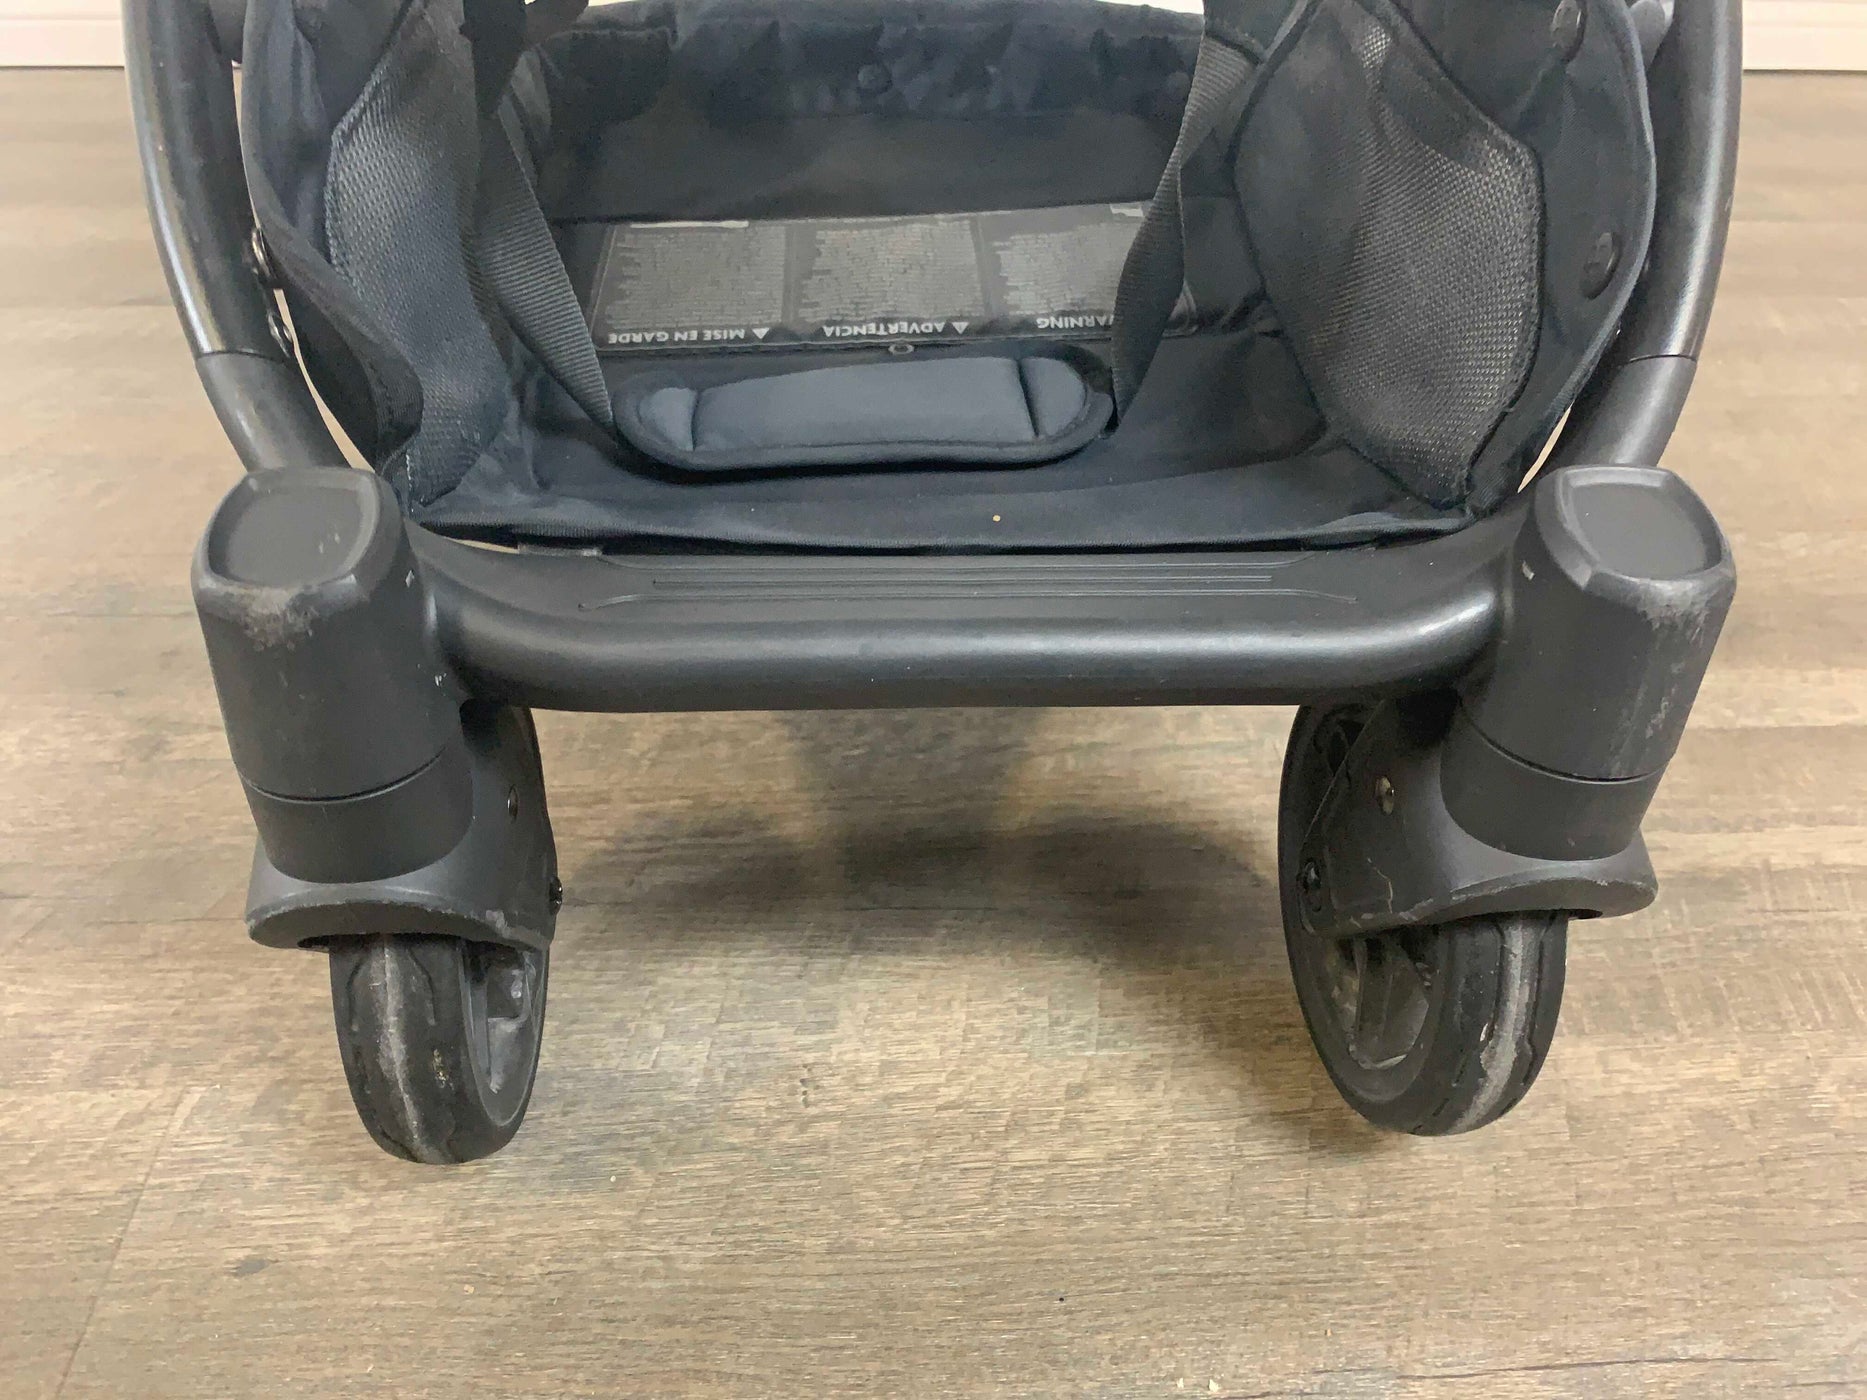 uppababy minu used for sale